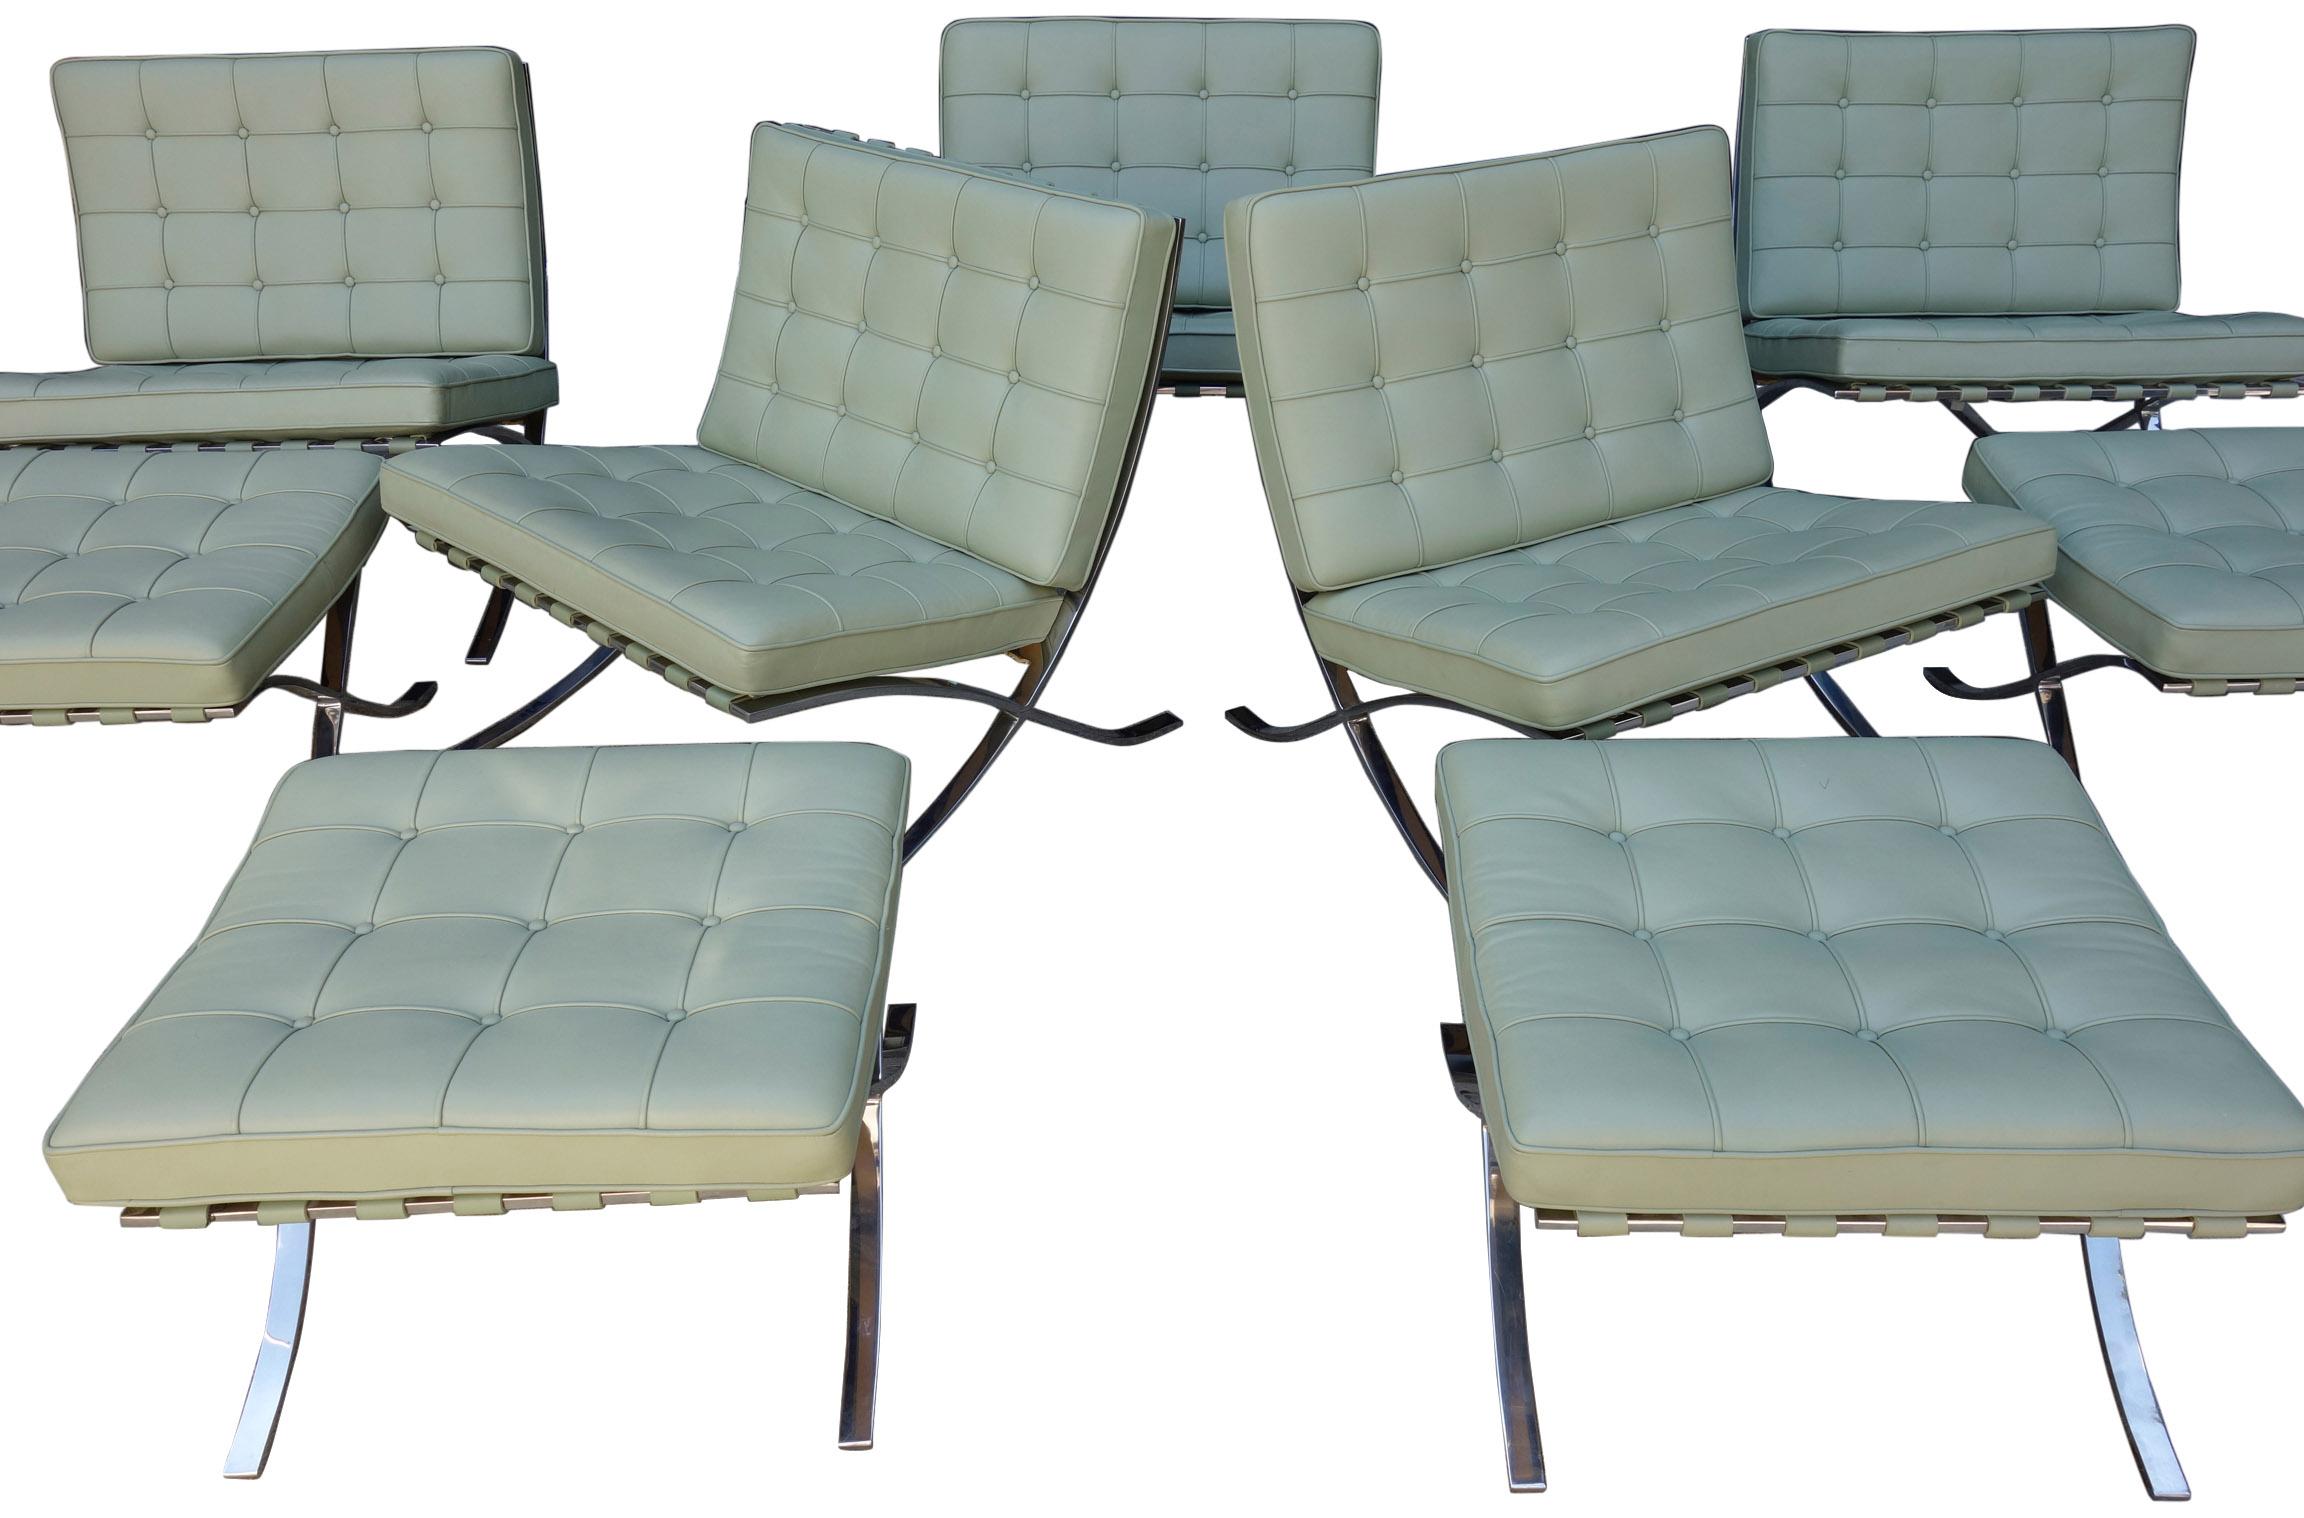 Midcentury Ludwig Mies van der Rohe Barcelona ottomans / stools for Knoll. The classic chair that helped define Mid-Century Modernism. This is the highly desirable version produced in stainless steel using screws instead of rivets. They are slightly